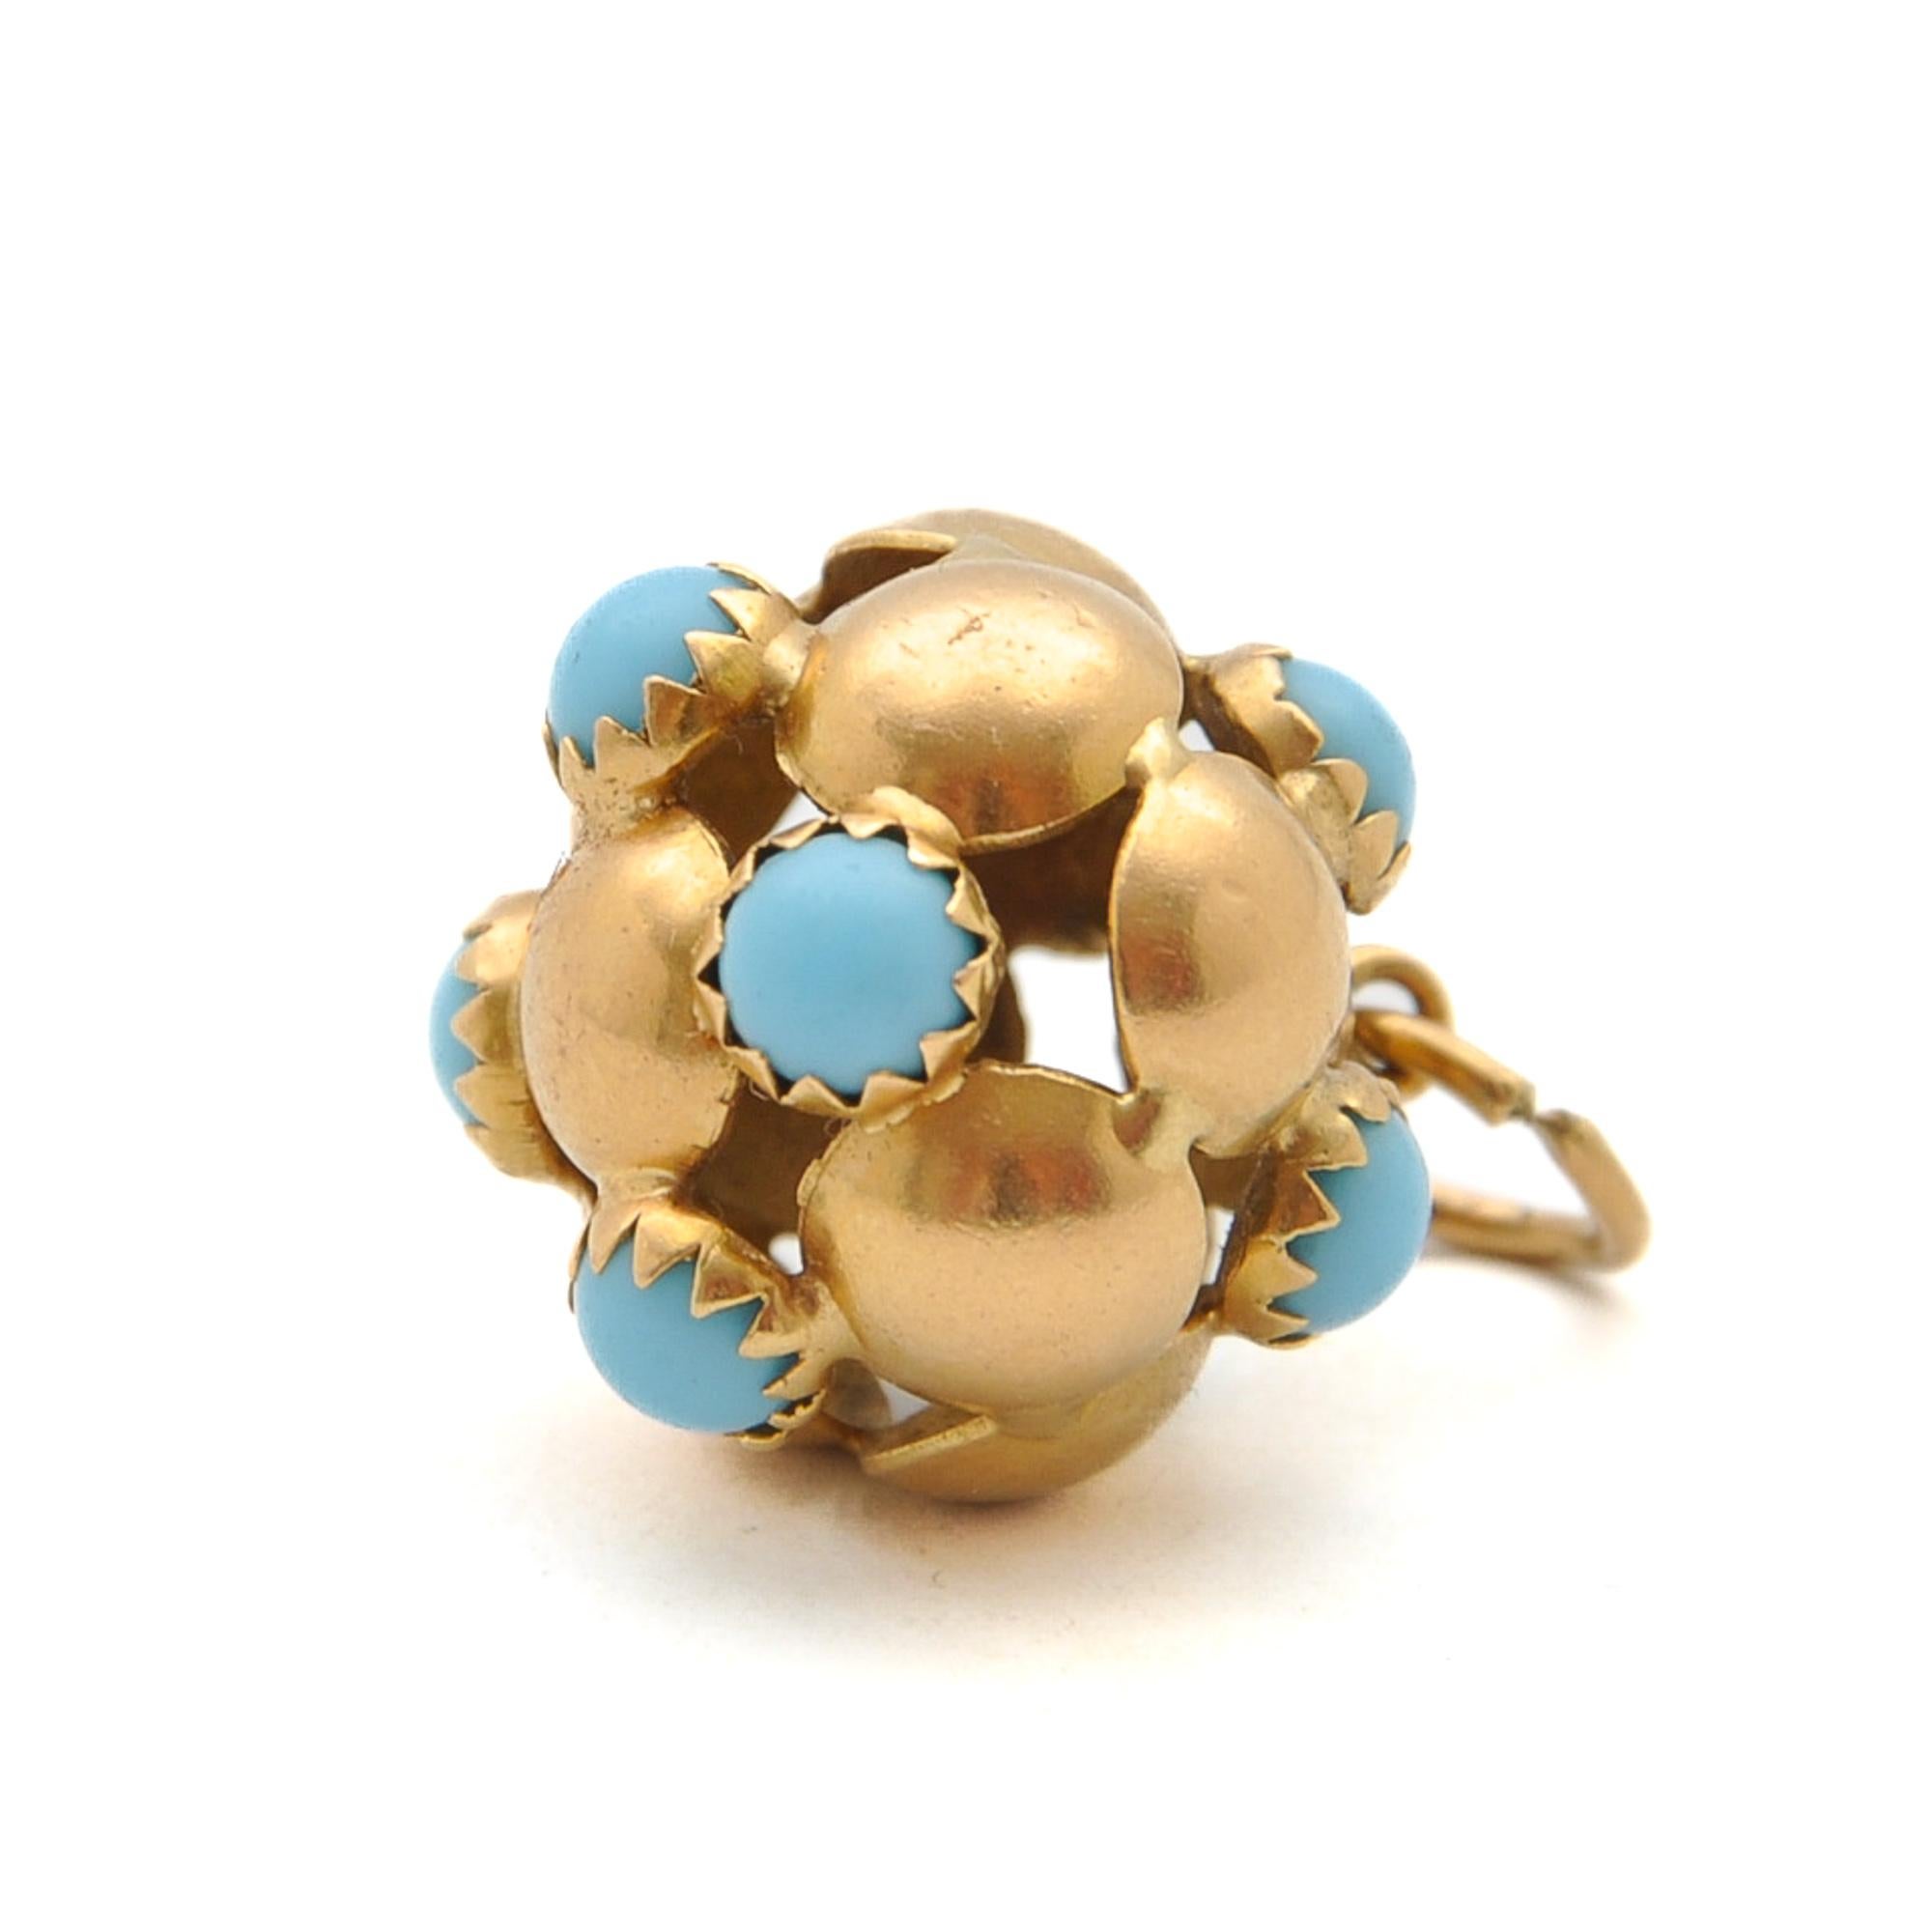 Vintage 18K Gold and Turquoise Ball Charm Pendant For Sale 2